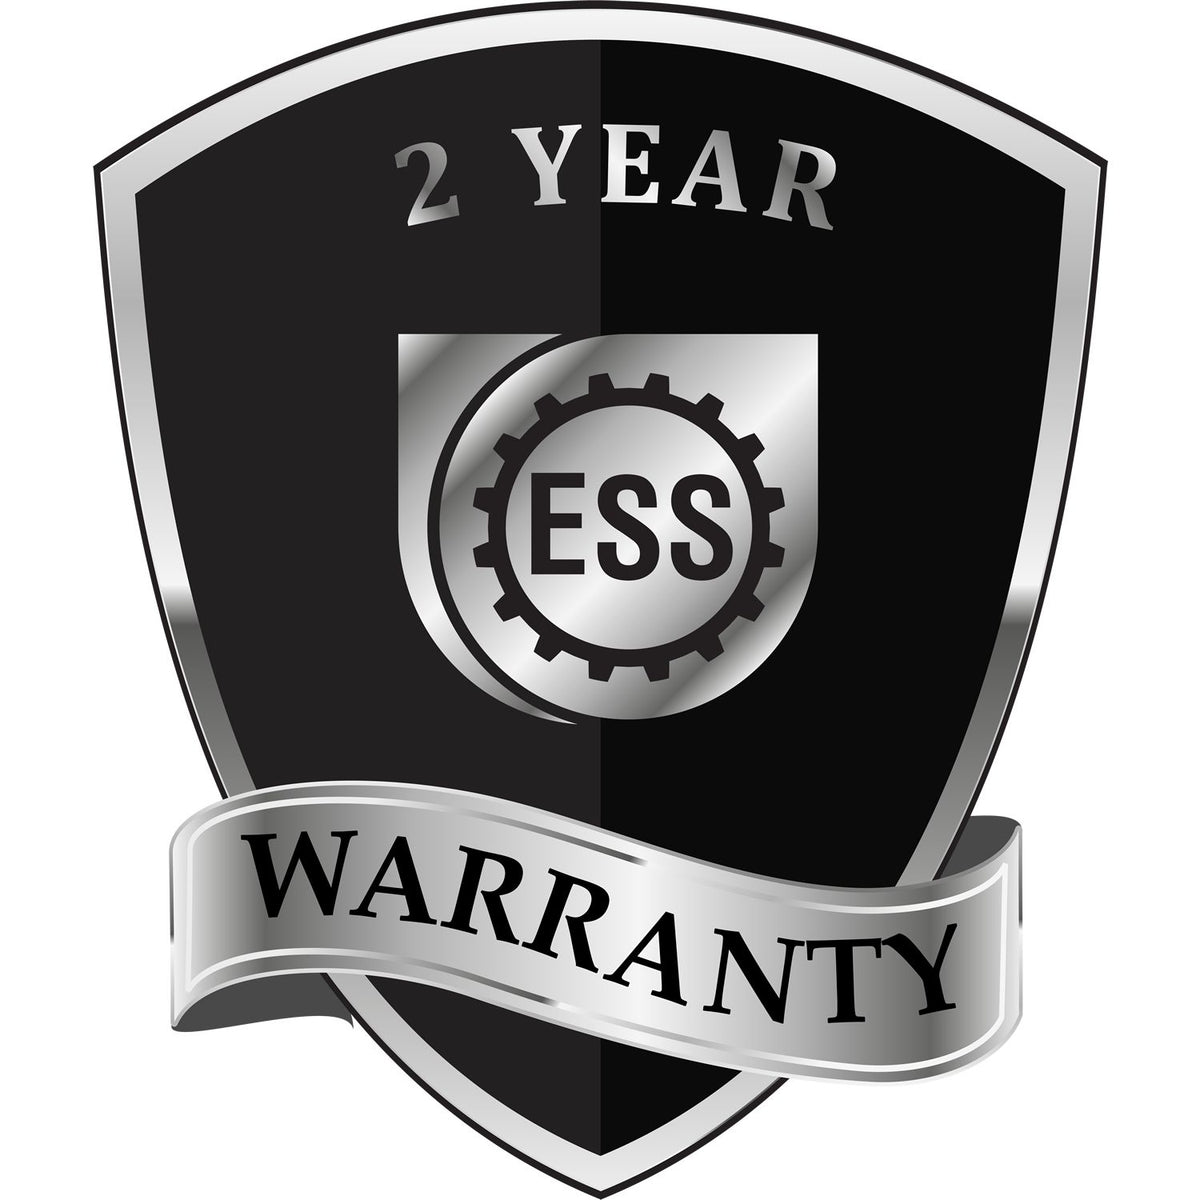 A black and silver badge or emblem showing warranty information for the Indiana Geologist Desk Seal